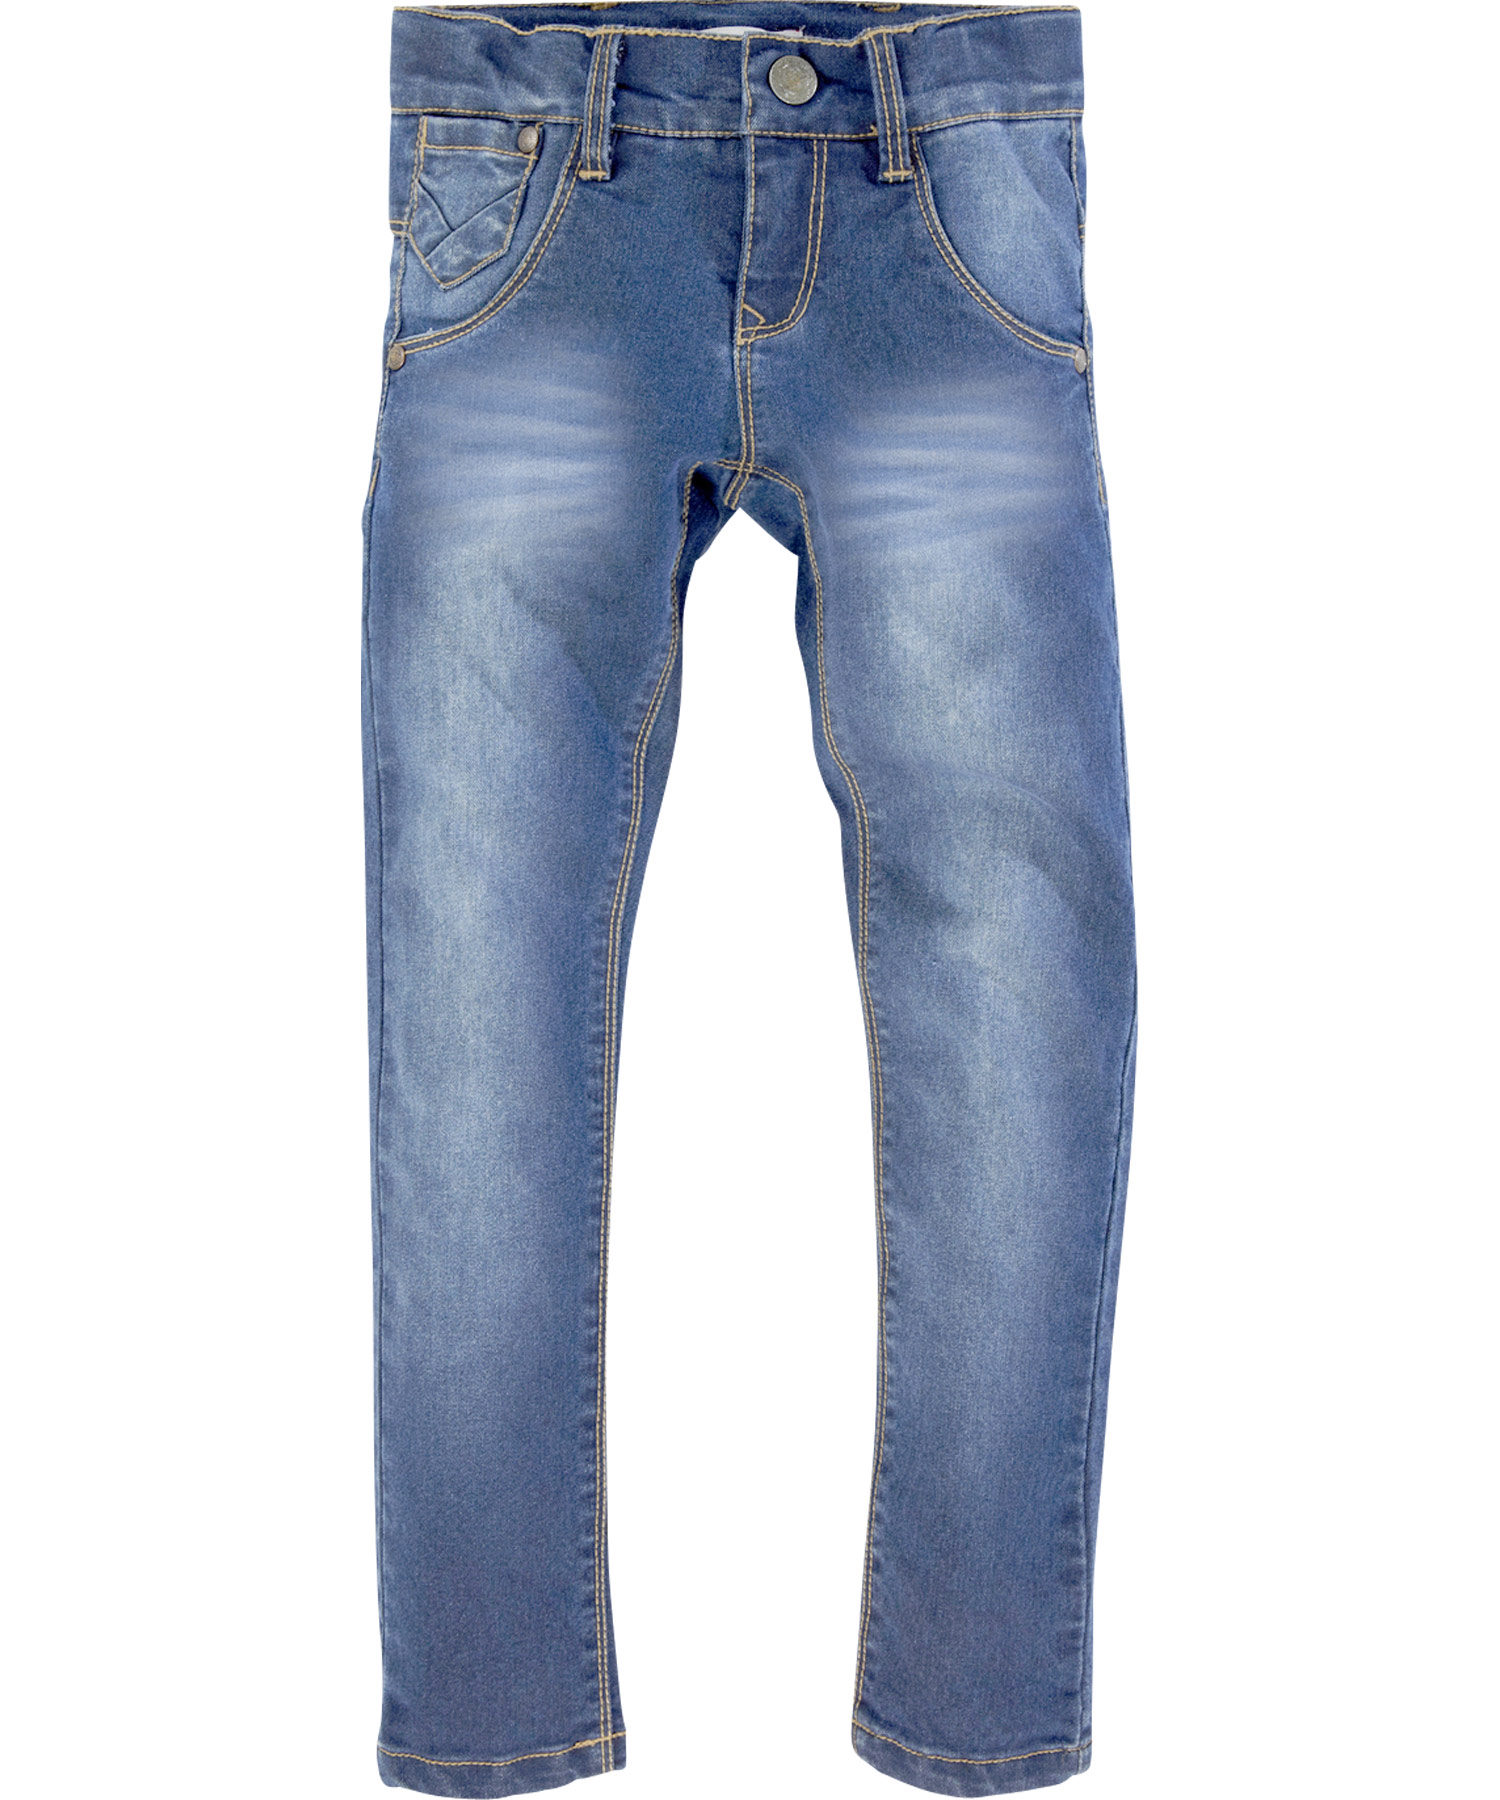 New! Name It Wonderful Blue Jeans for Girls with adjustable waist ...